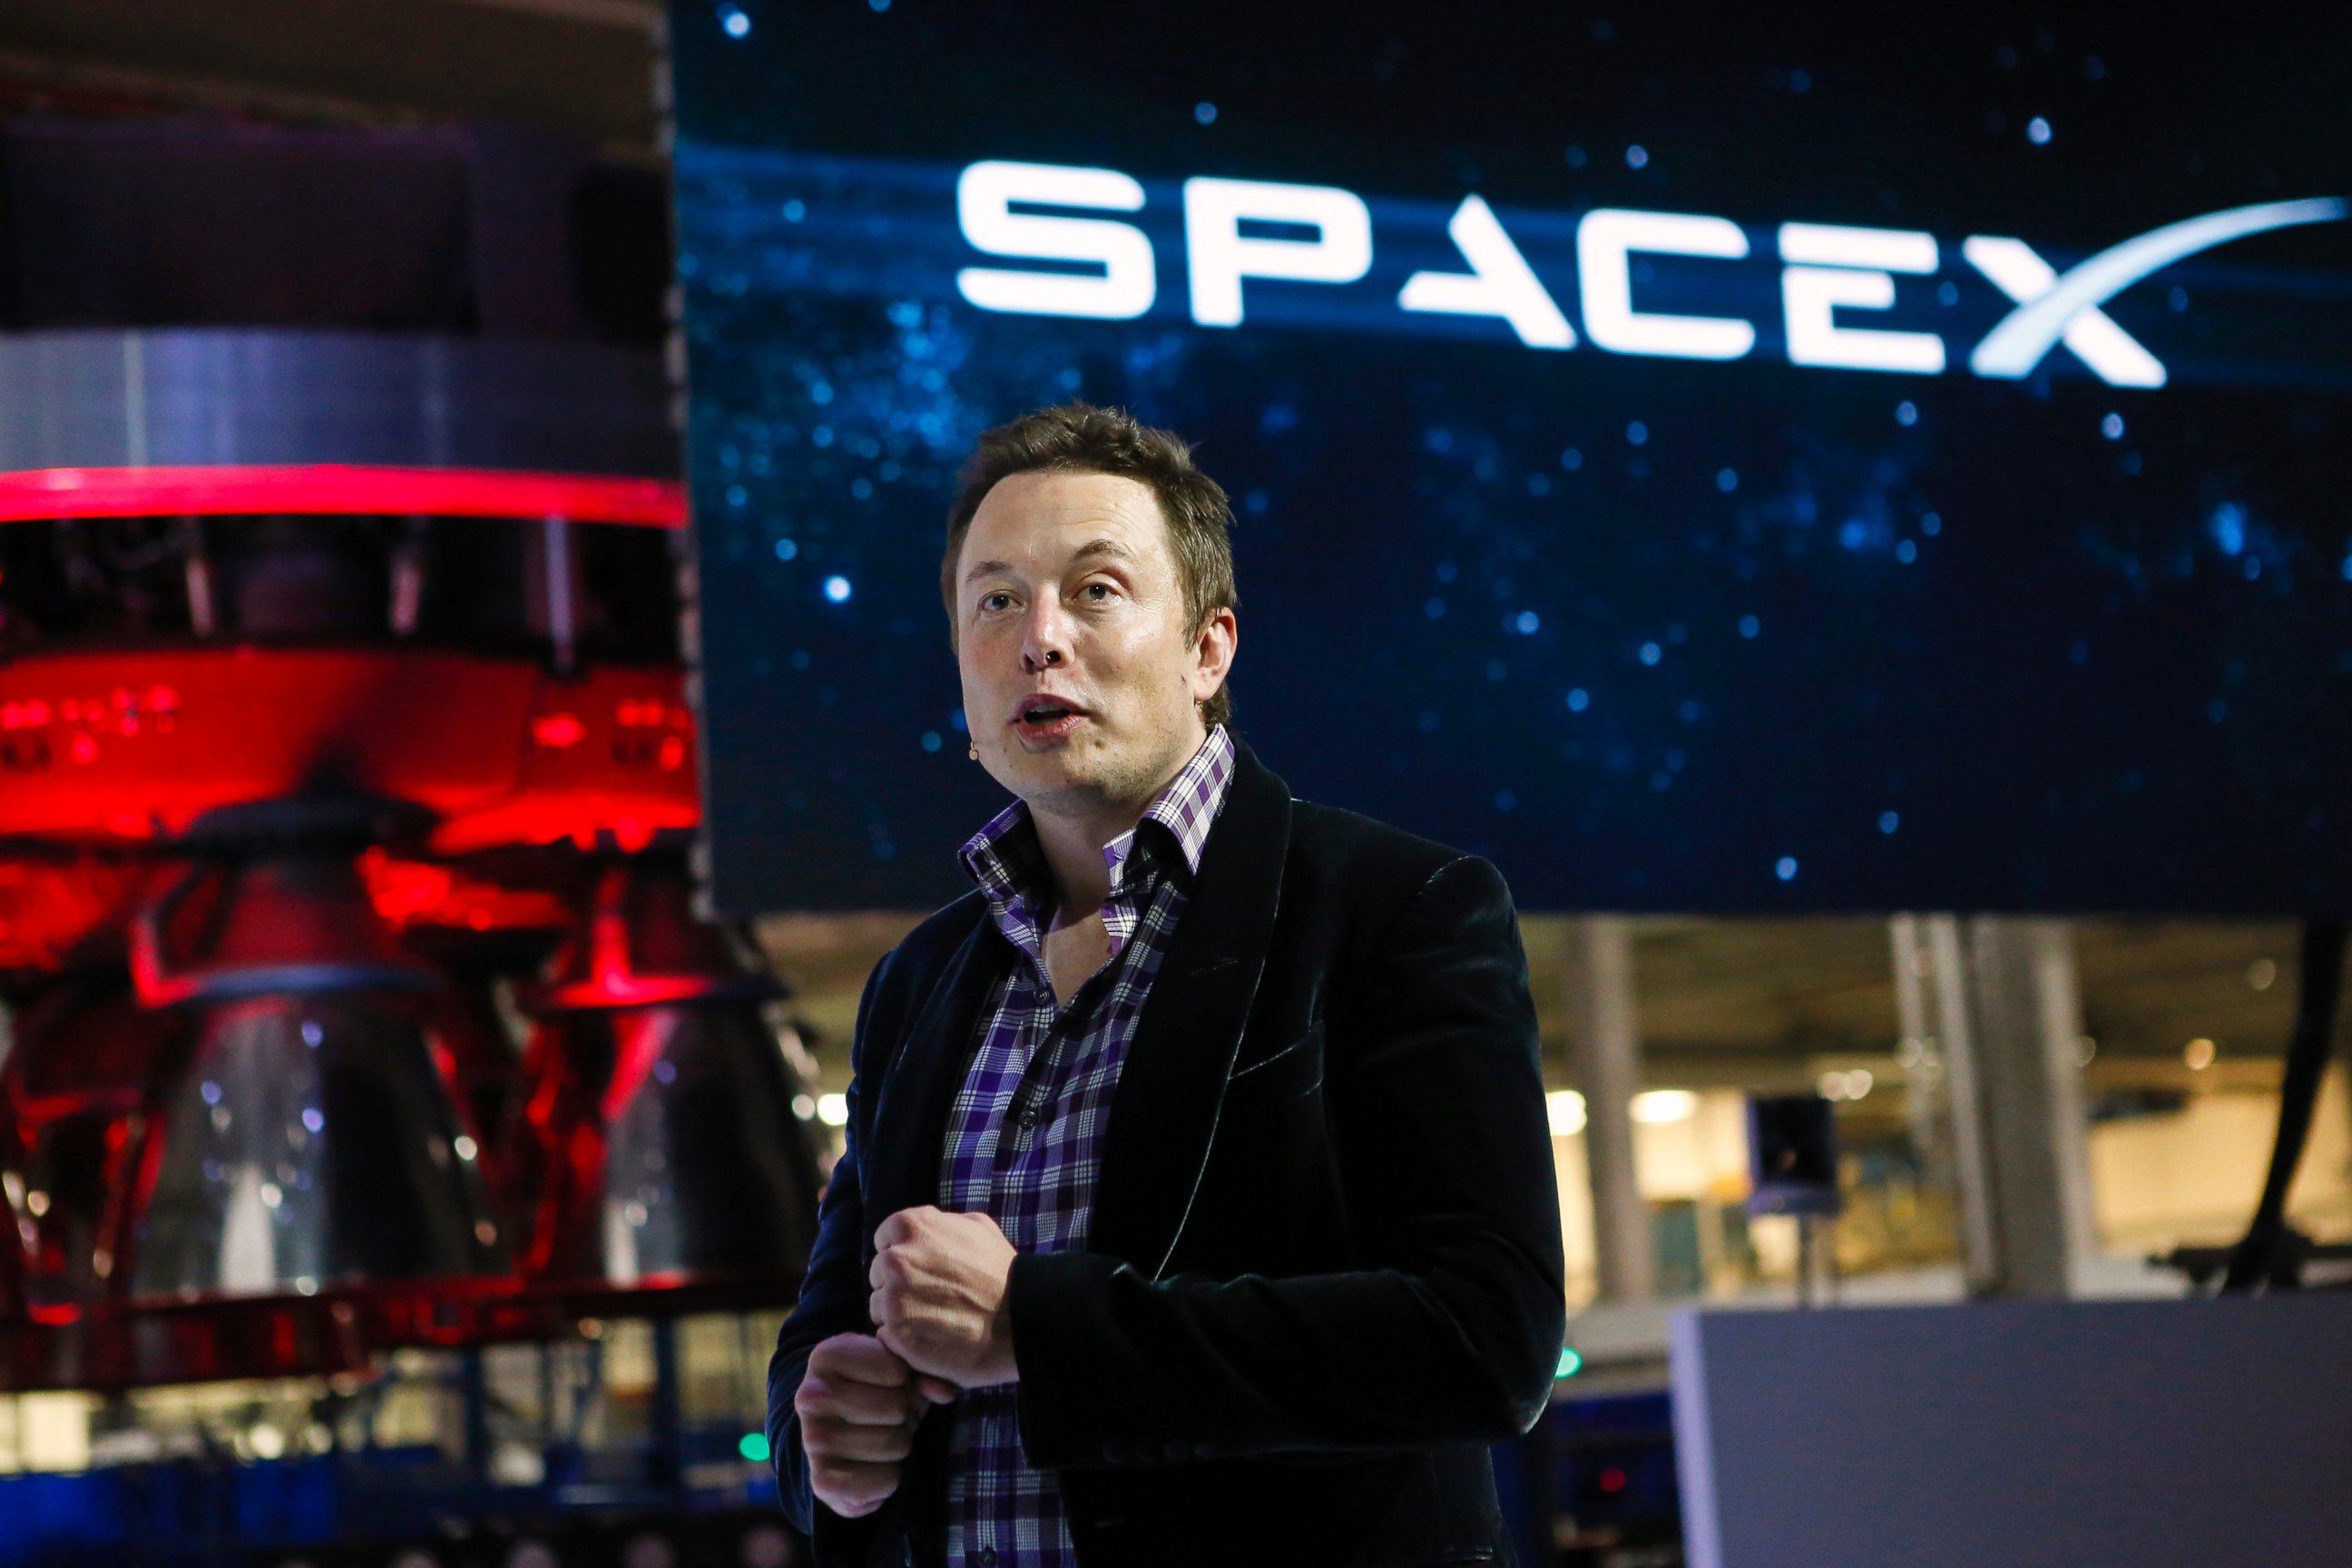 PHOTO: Elon Musk, chief executive officer of Space Exploration Technologies Corp. (SpaceX), speaks at the unveiling of the Manned Dragon V2 Space Taxi in Hawthorne, Calif., May 29, 2014.